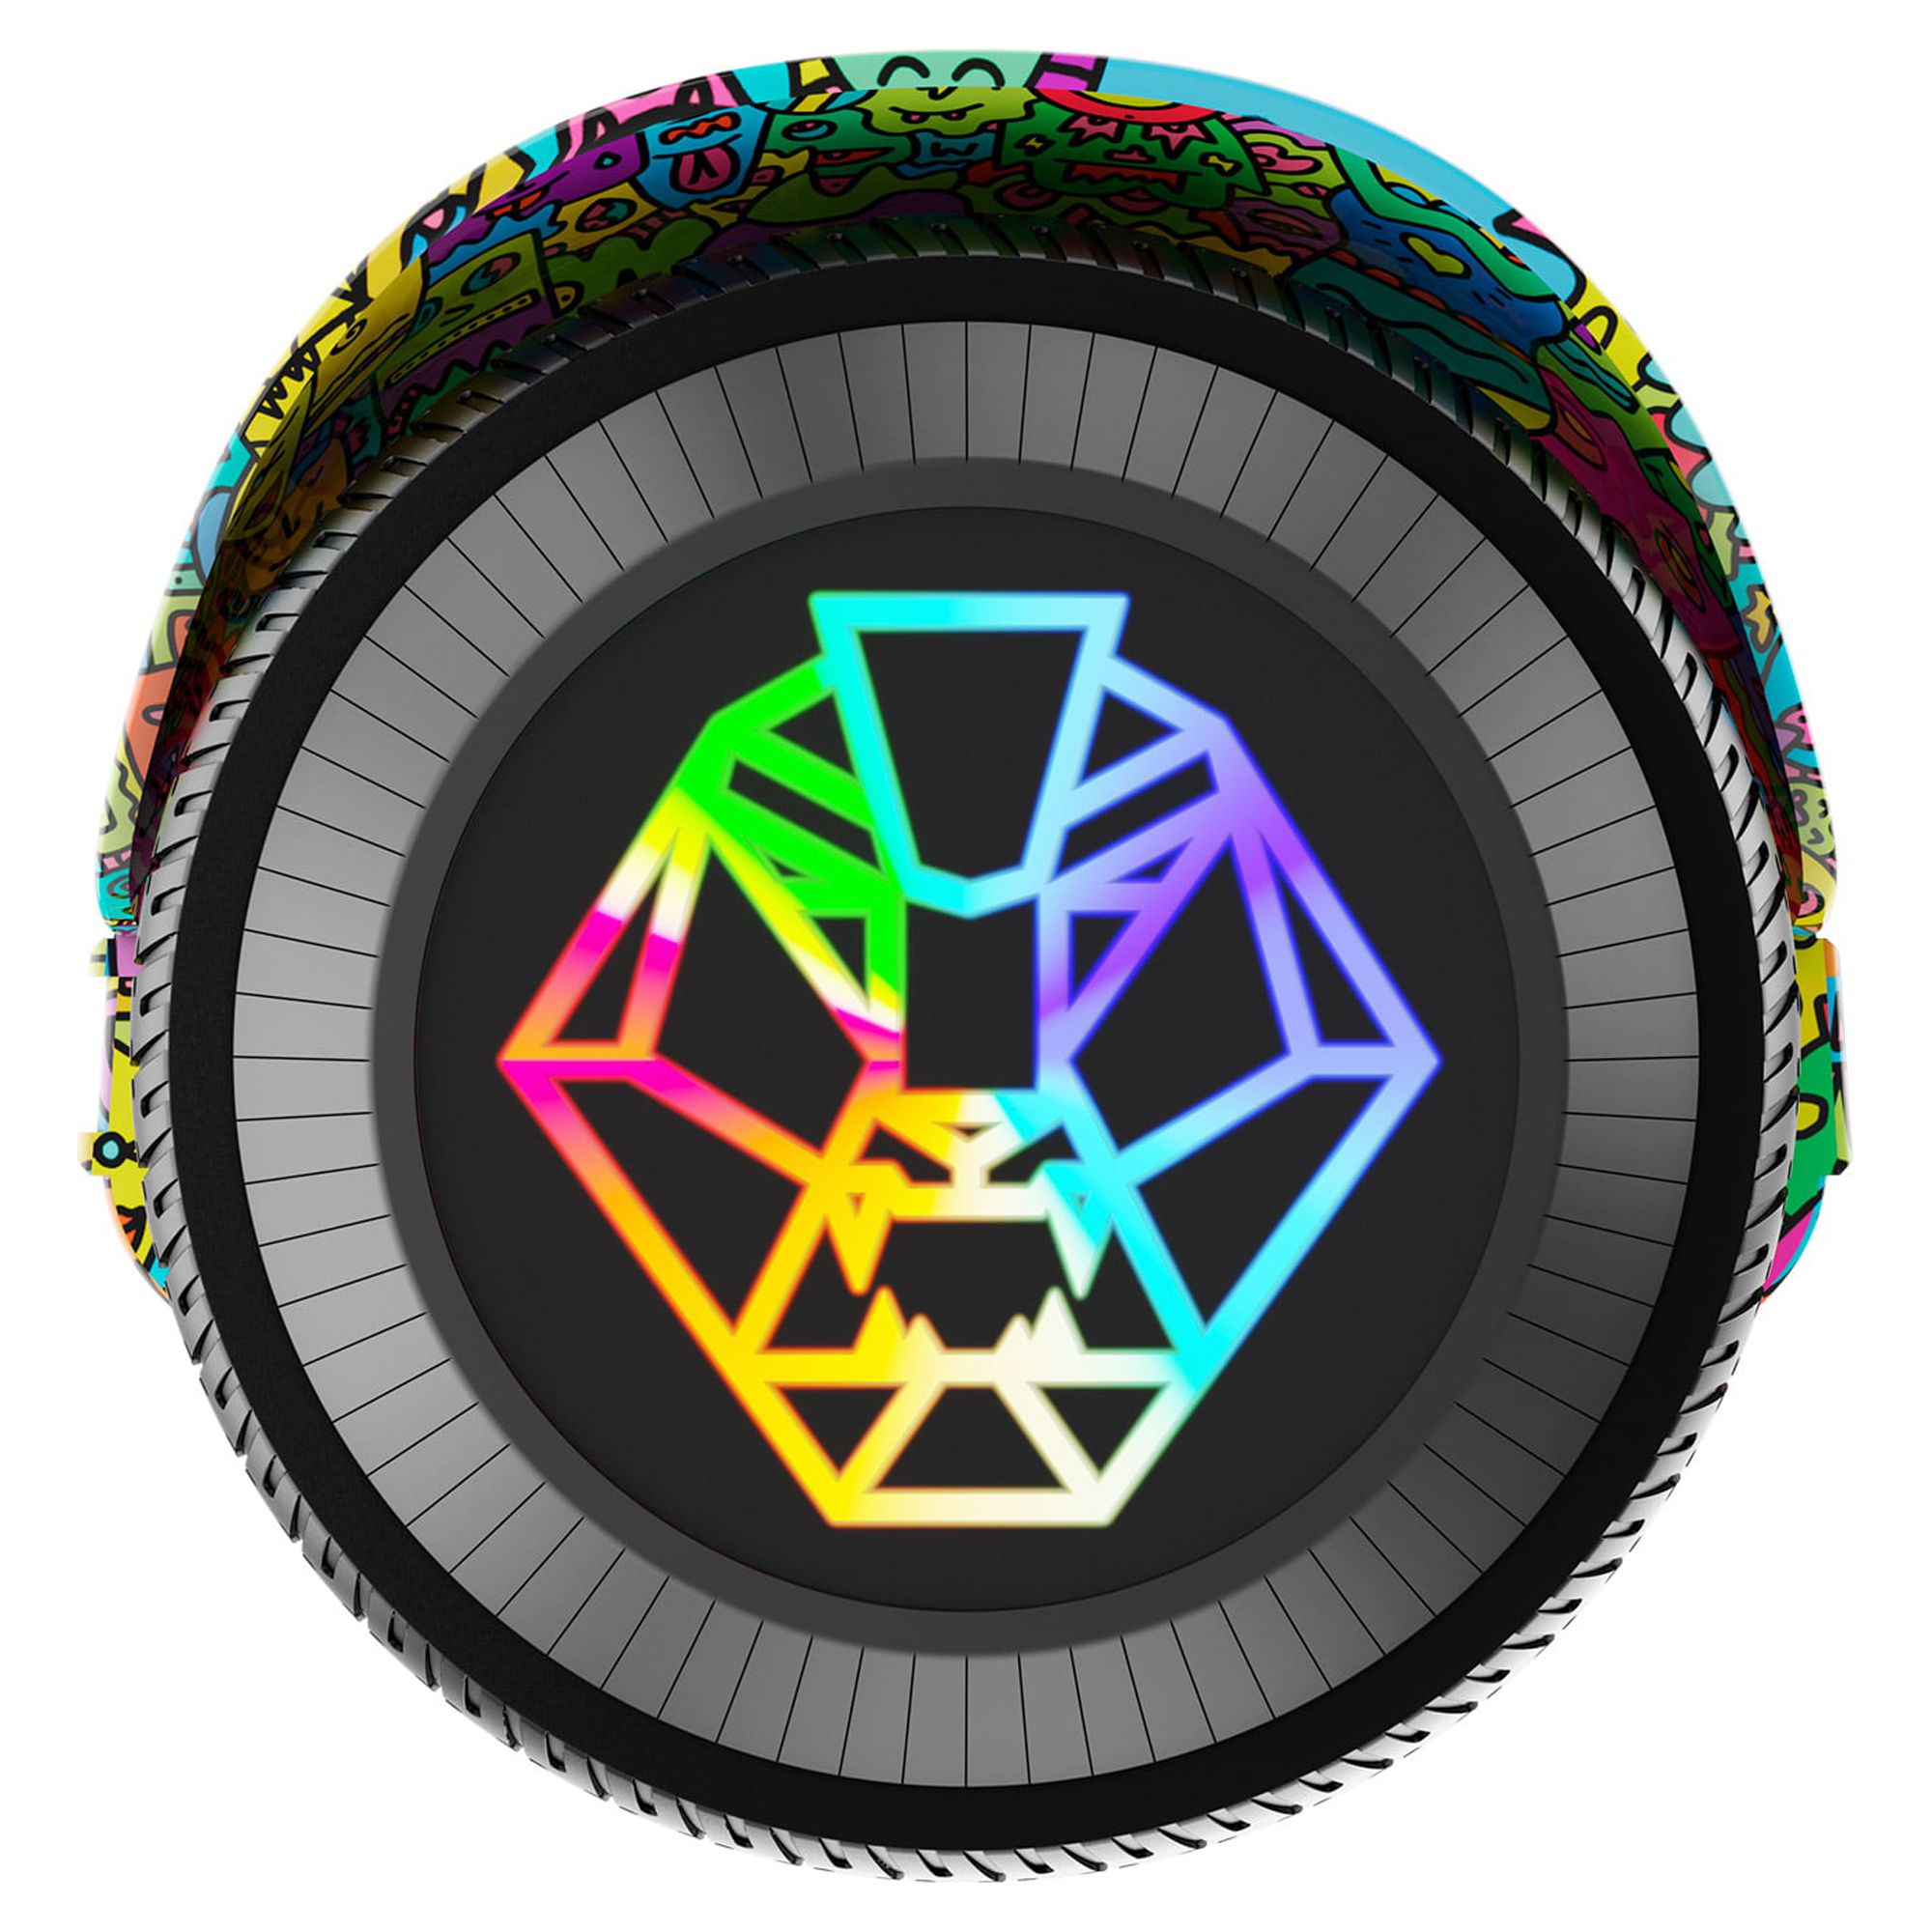 Swagtron Multicolor SwagBOARD EVO Freestyle Hoverboard Bluetooth Speaker Light-Up Wheels, 7 MPH Max Speed - image 3 of 9